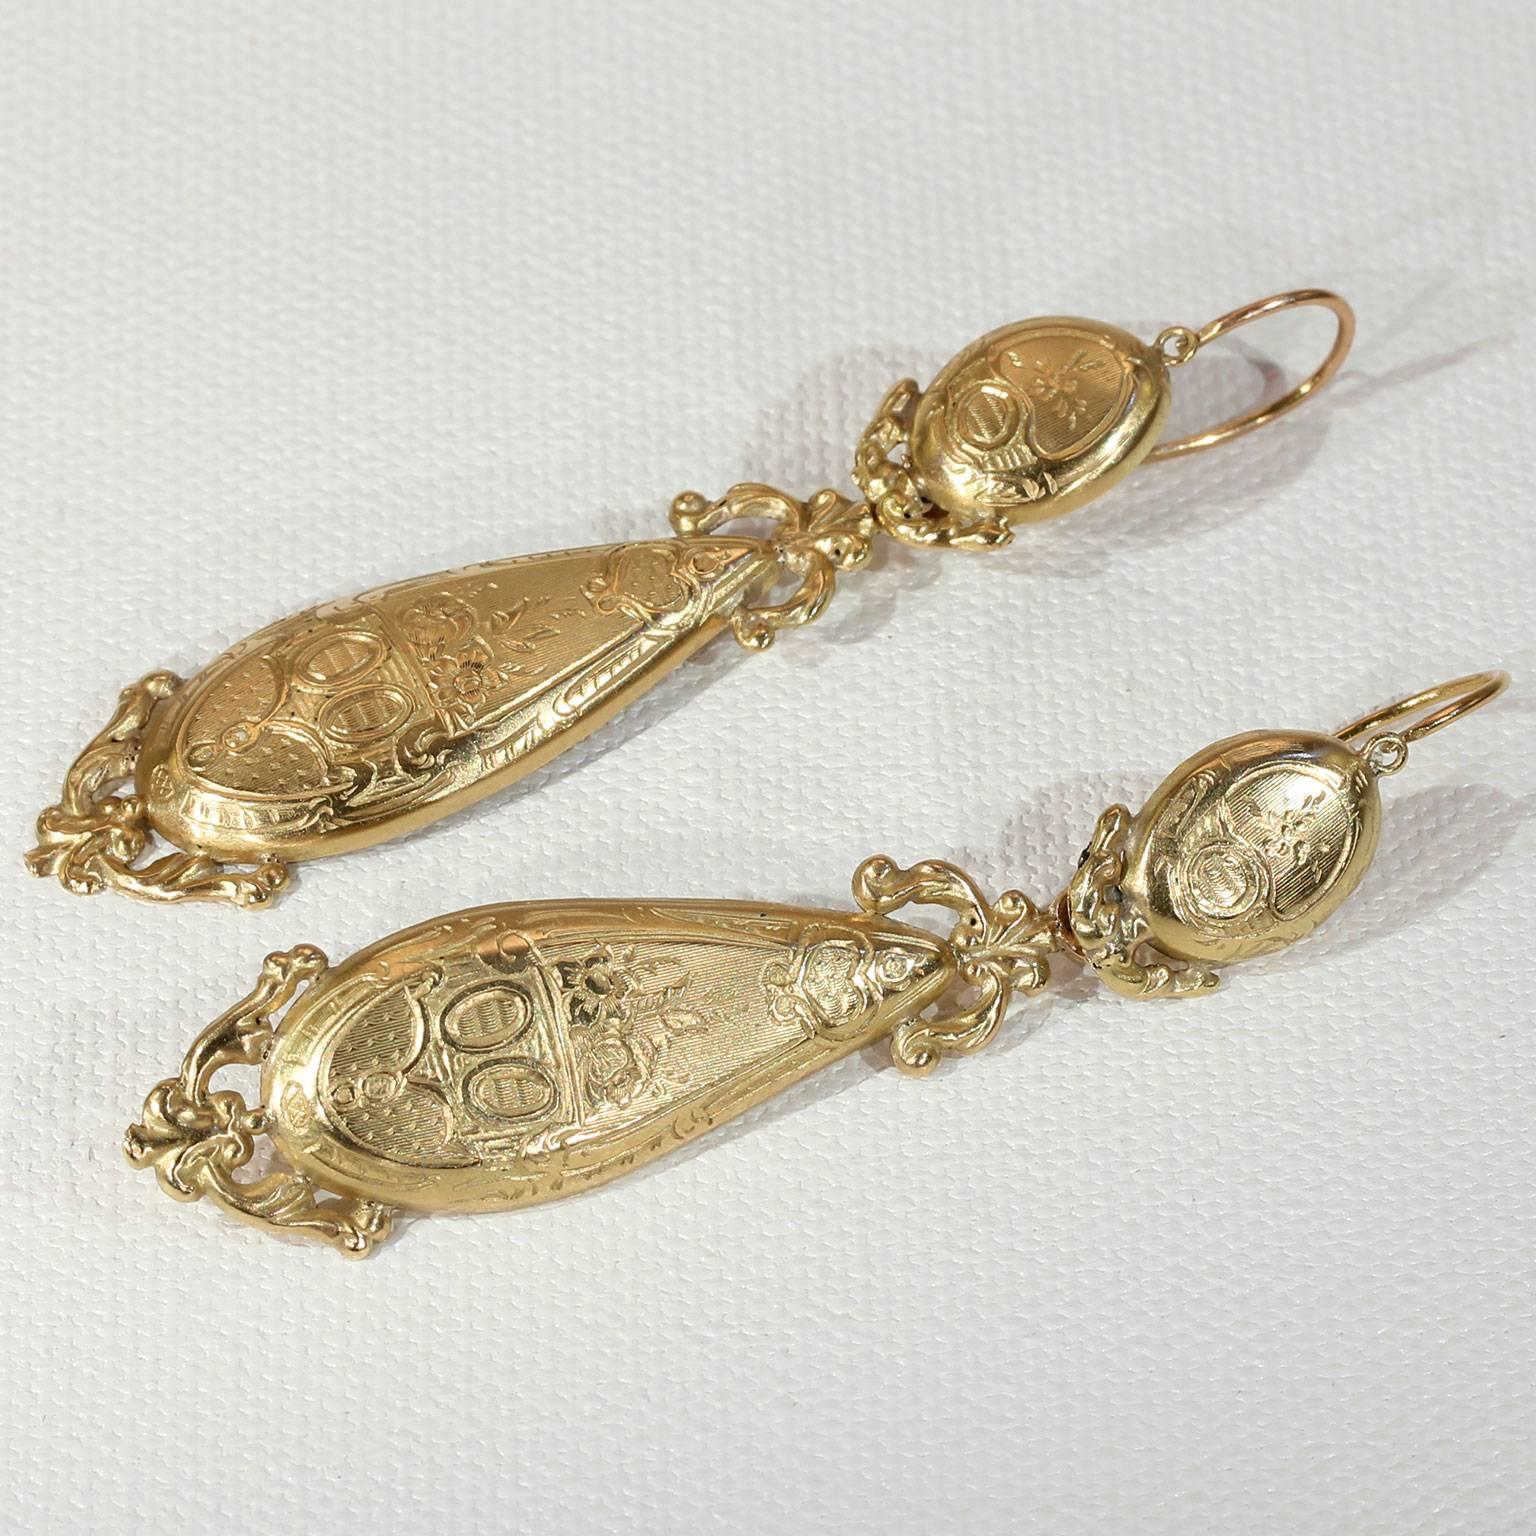 These French beauties go from day to night with ease by simply adding their removable drop pendants. Hand crafted with extremely fine detail in France in about 1830 in 18 karat gold. The earrings are marked on all four parts with the French assay